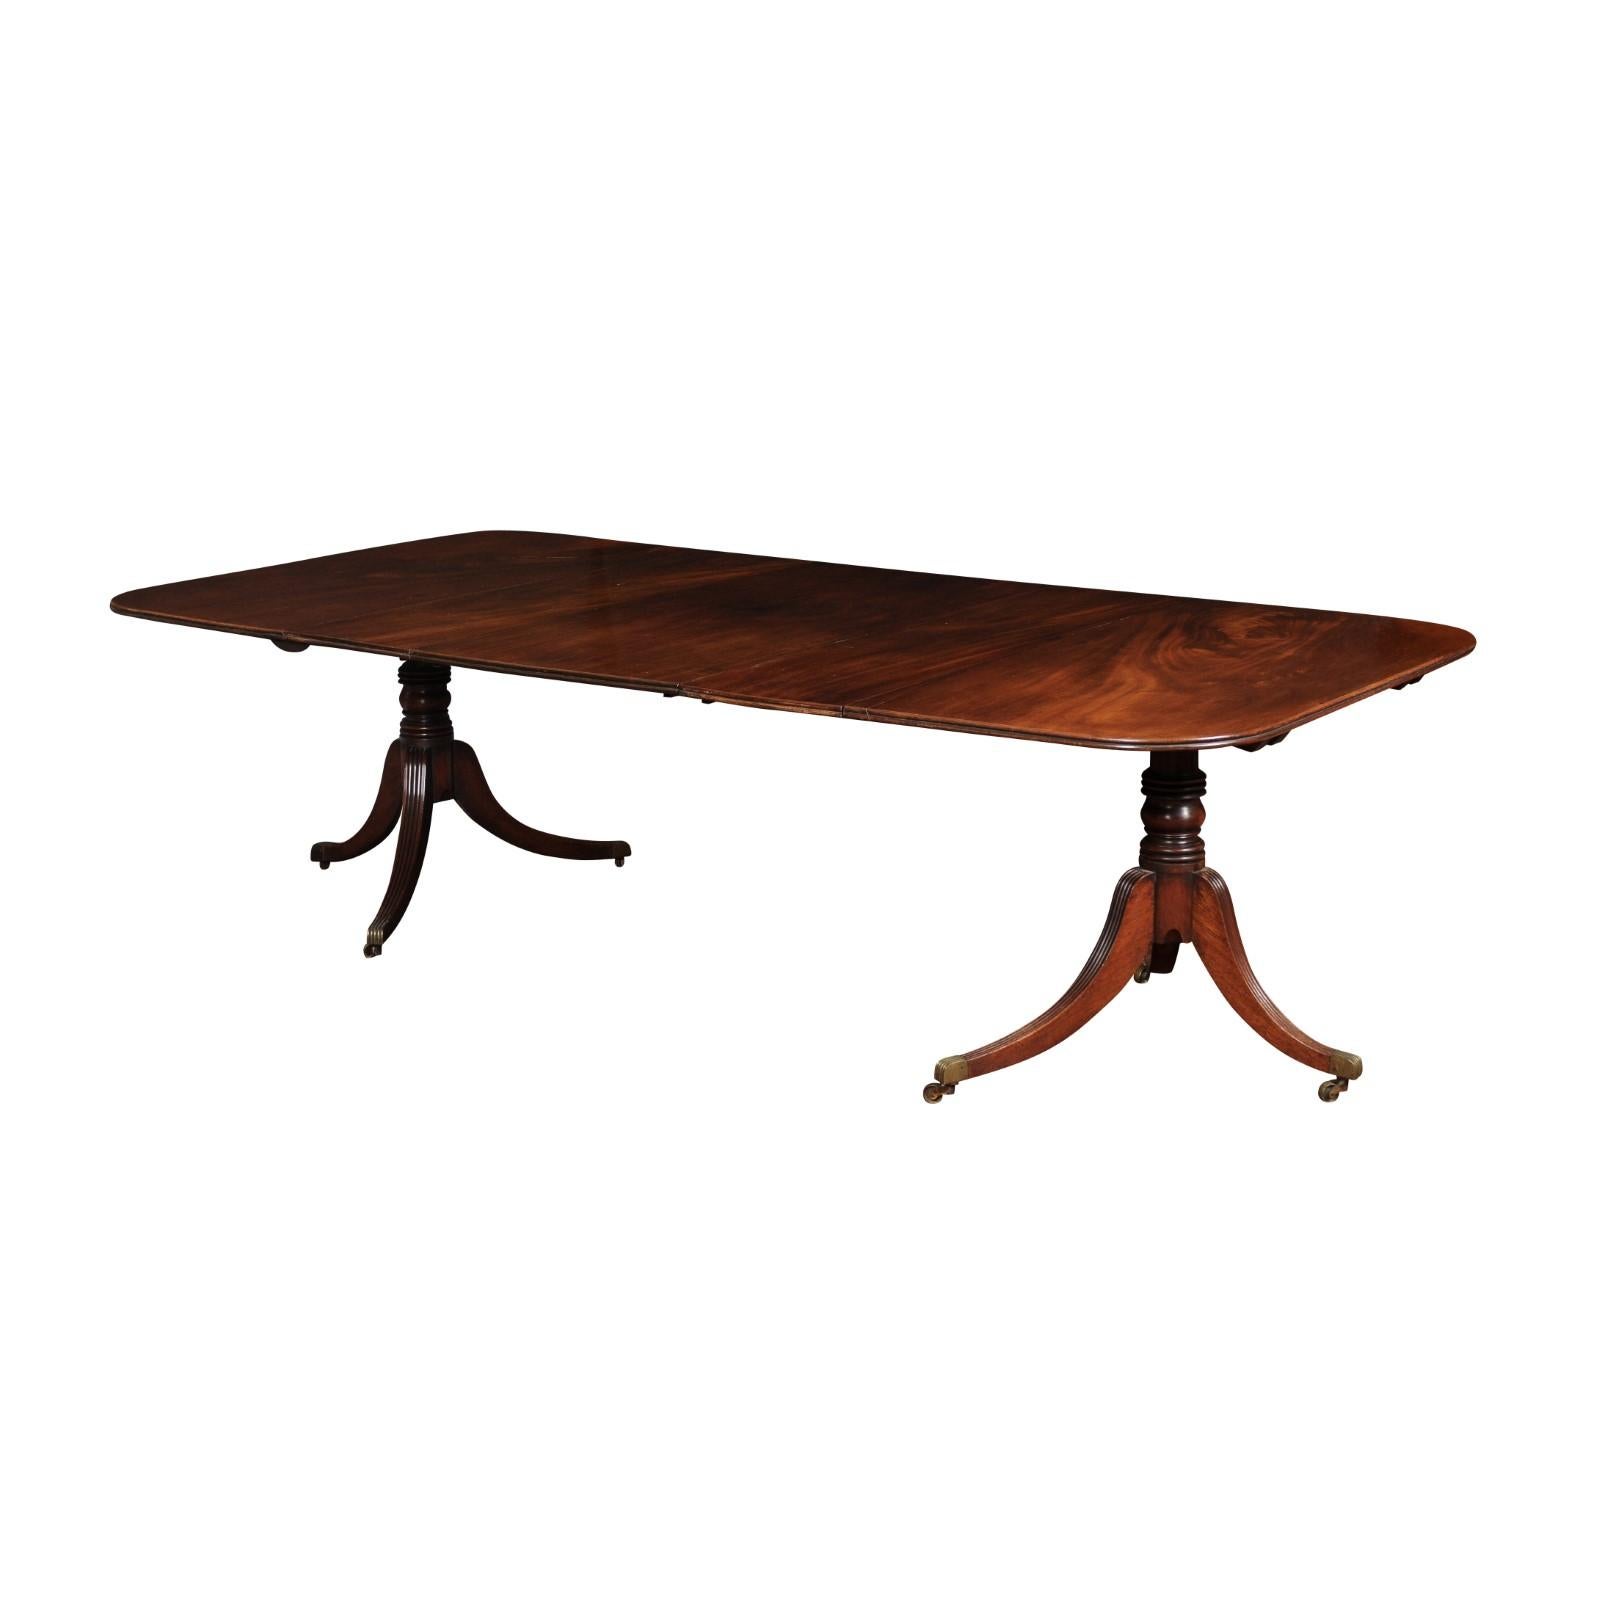 English Regency Mahogany Double Pedestal Extending Dining Table with 2 Leaves For Sale 15